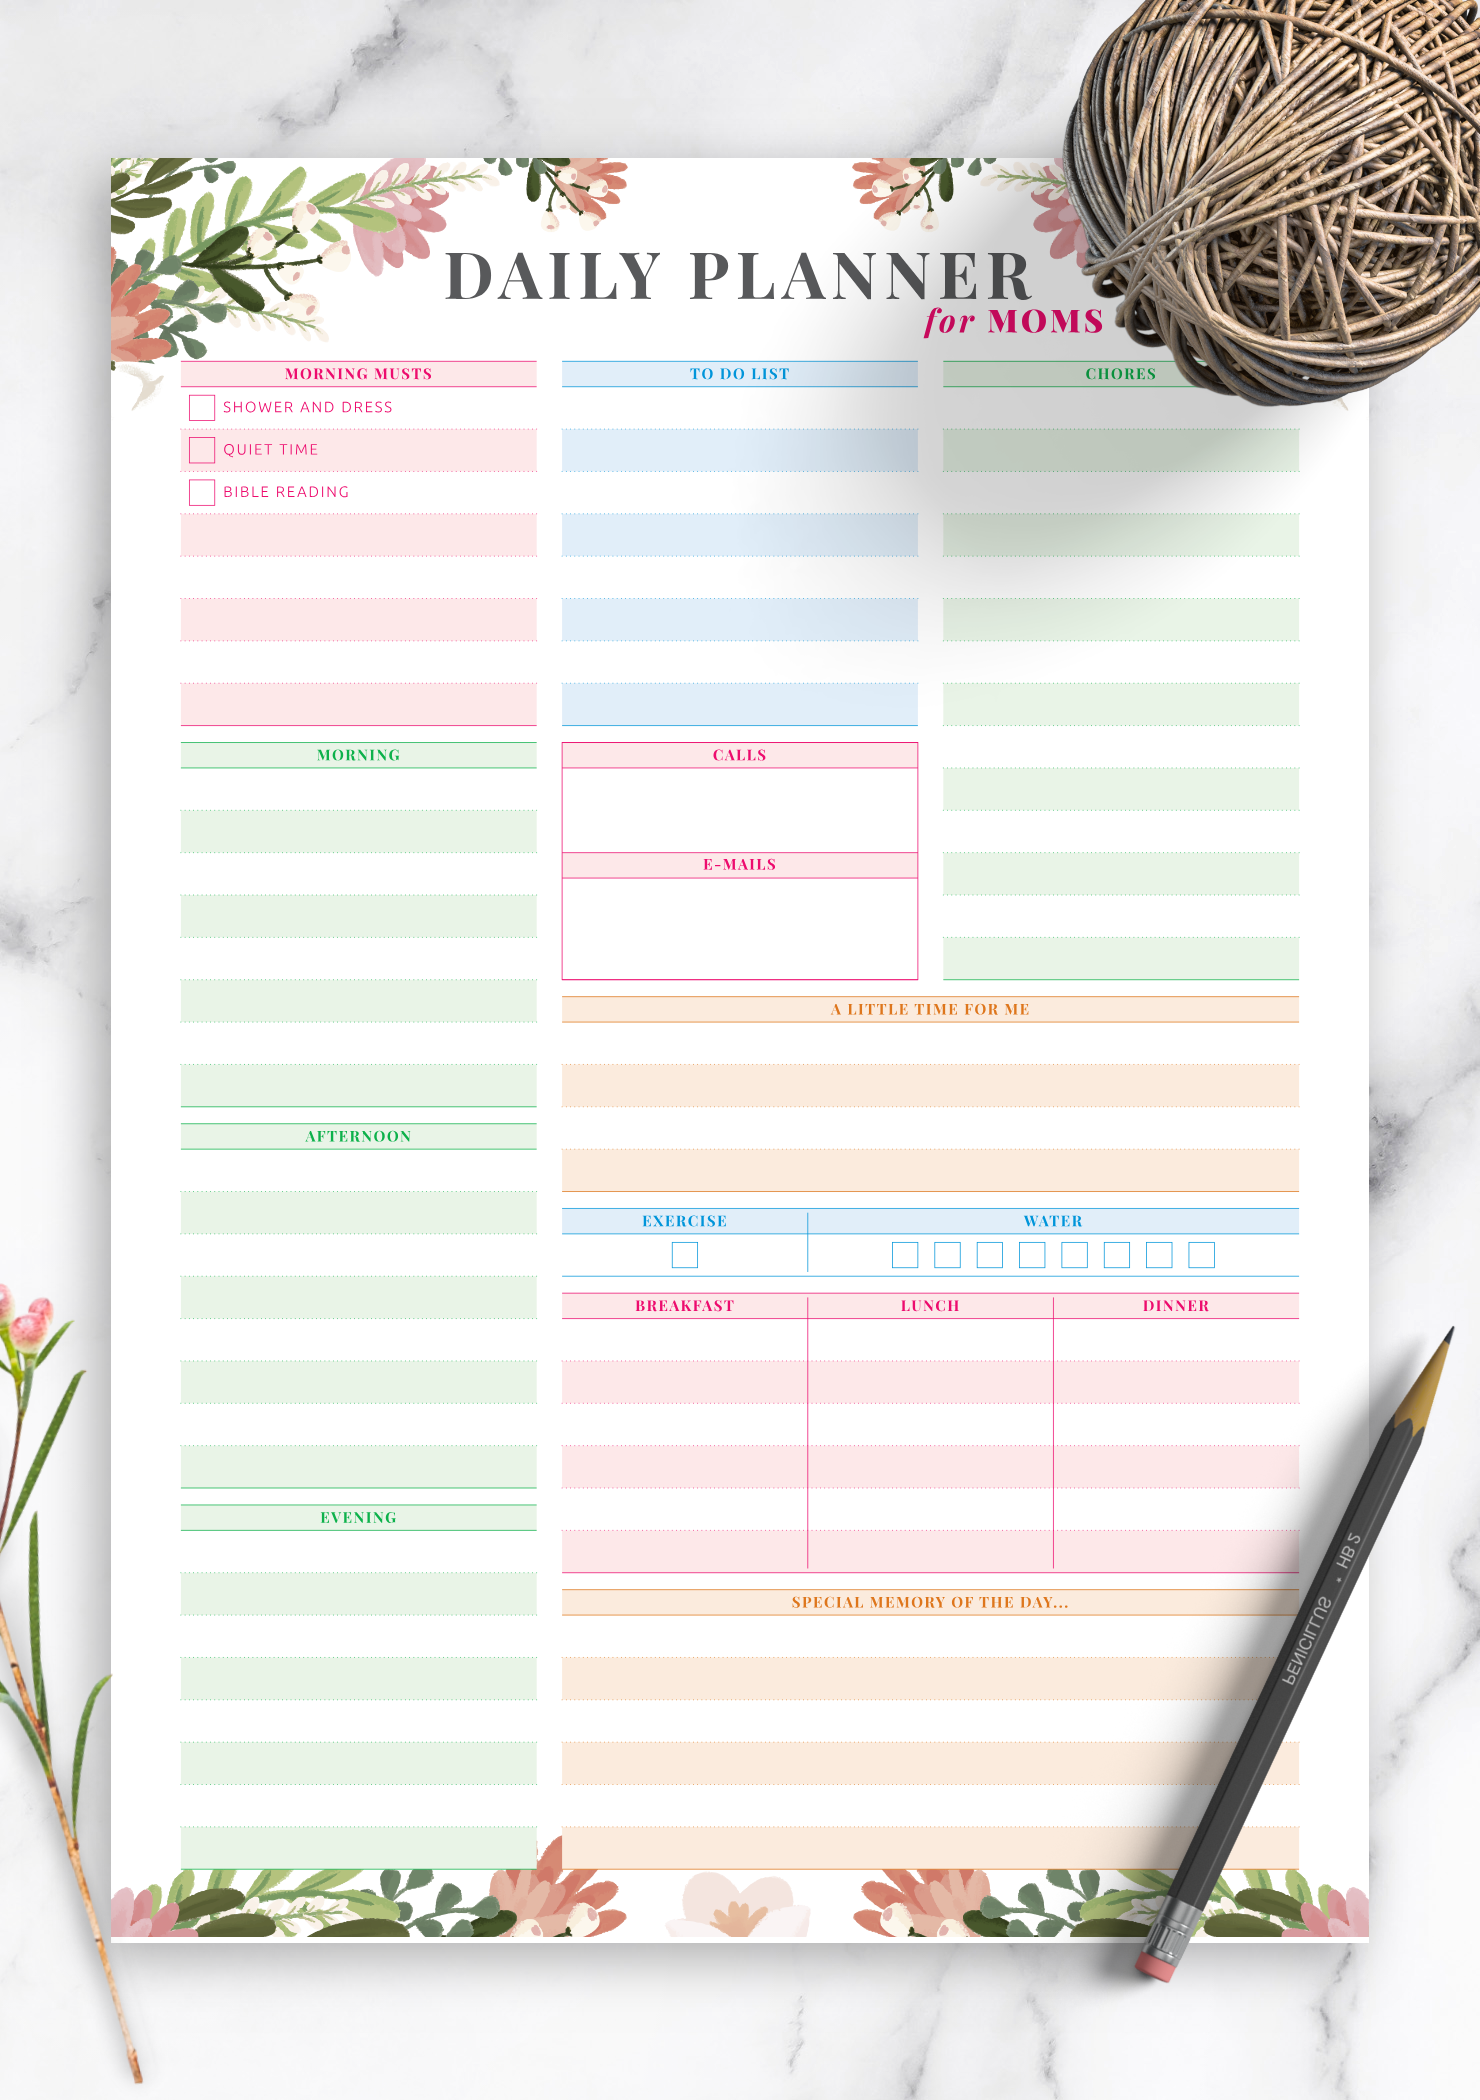 calendars-planners-paper-party-supplies-weekly-family-planner-home